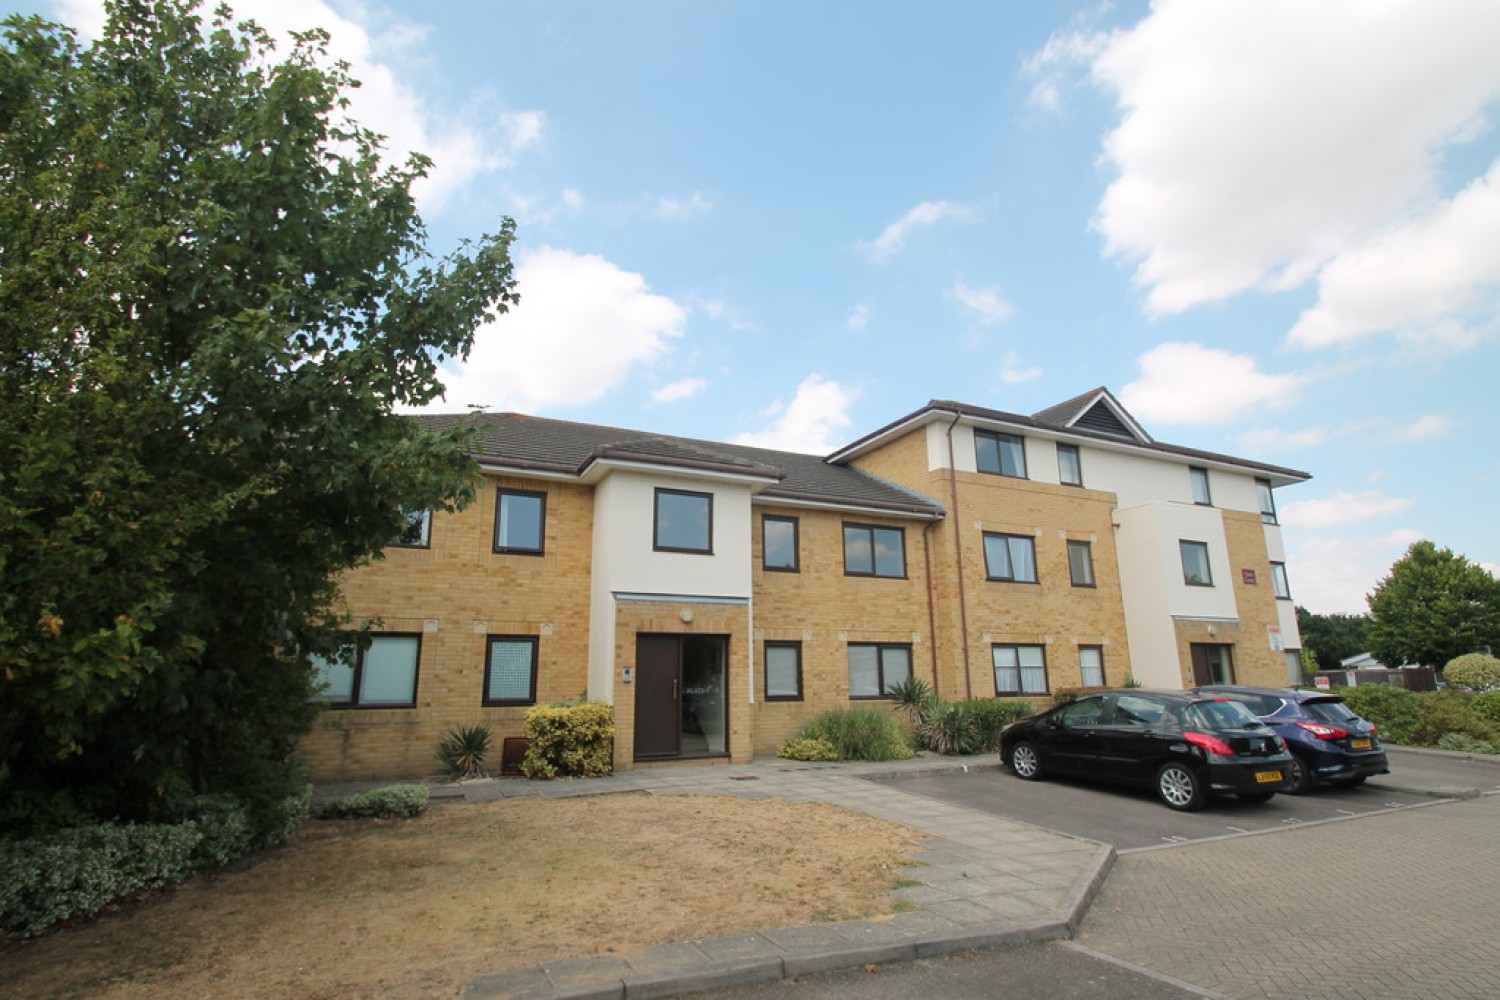 Oasis Court, Chelmsford